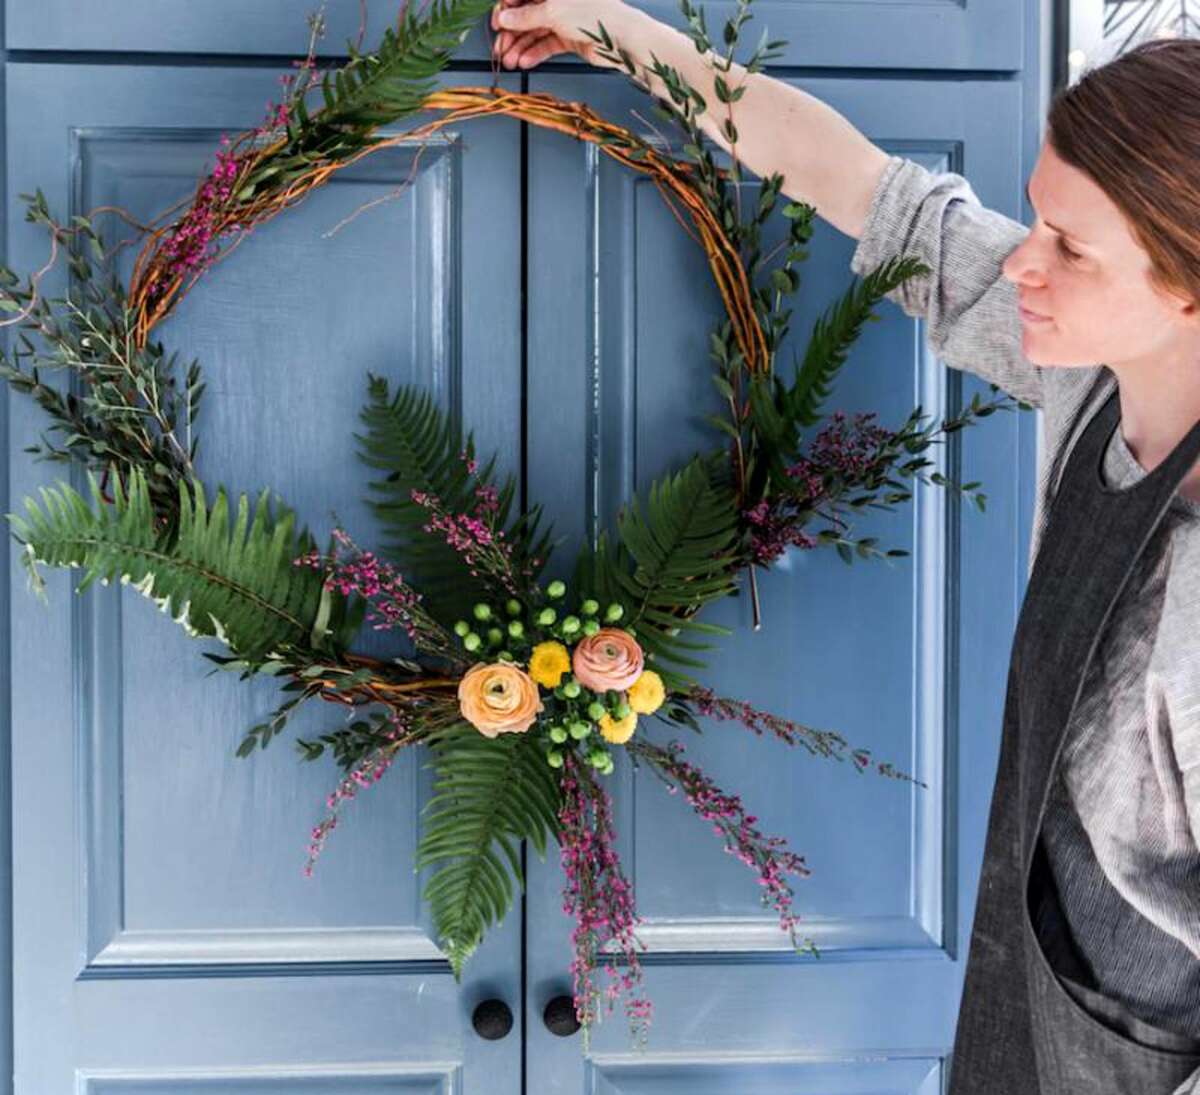 Learn how to make your own wreath from willow branches, fresh florals and beautiful, hand-dyed silk ribbon at the Smithy, 10 Main St, New Preston, on April 7, from 1 to 3 p.m. Holly Bailey is a local artist and curator of an online handmade market called Cultivations. With a passion for natural dyeing and working with flowers, she makes wreaths and other decorative home goods that celebrate the beauty of nature. For more information about Cultivations, visit www.cultivations.com. $75. per person (includes supplies) RSVP to carol@thesmithystore.com or call 860-868-9003.